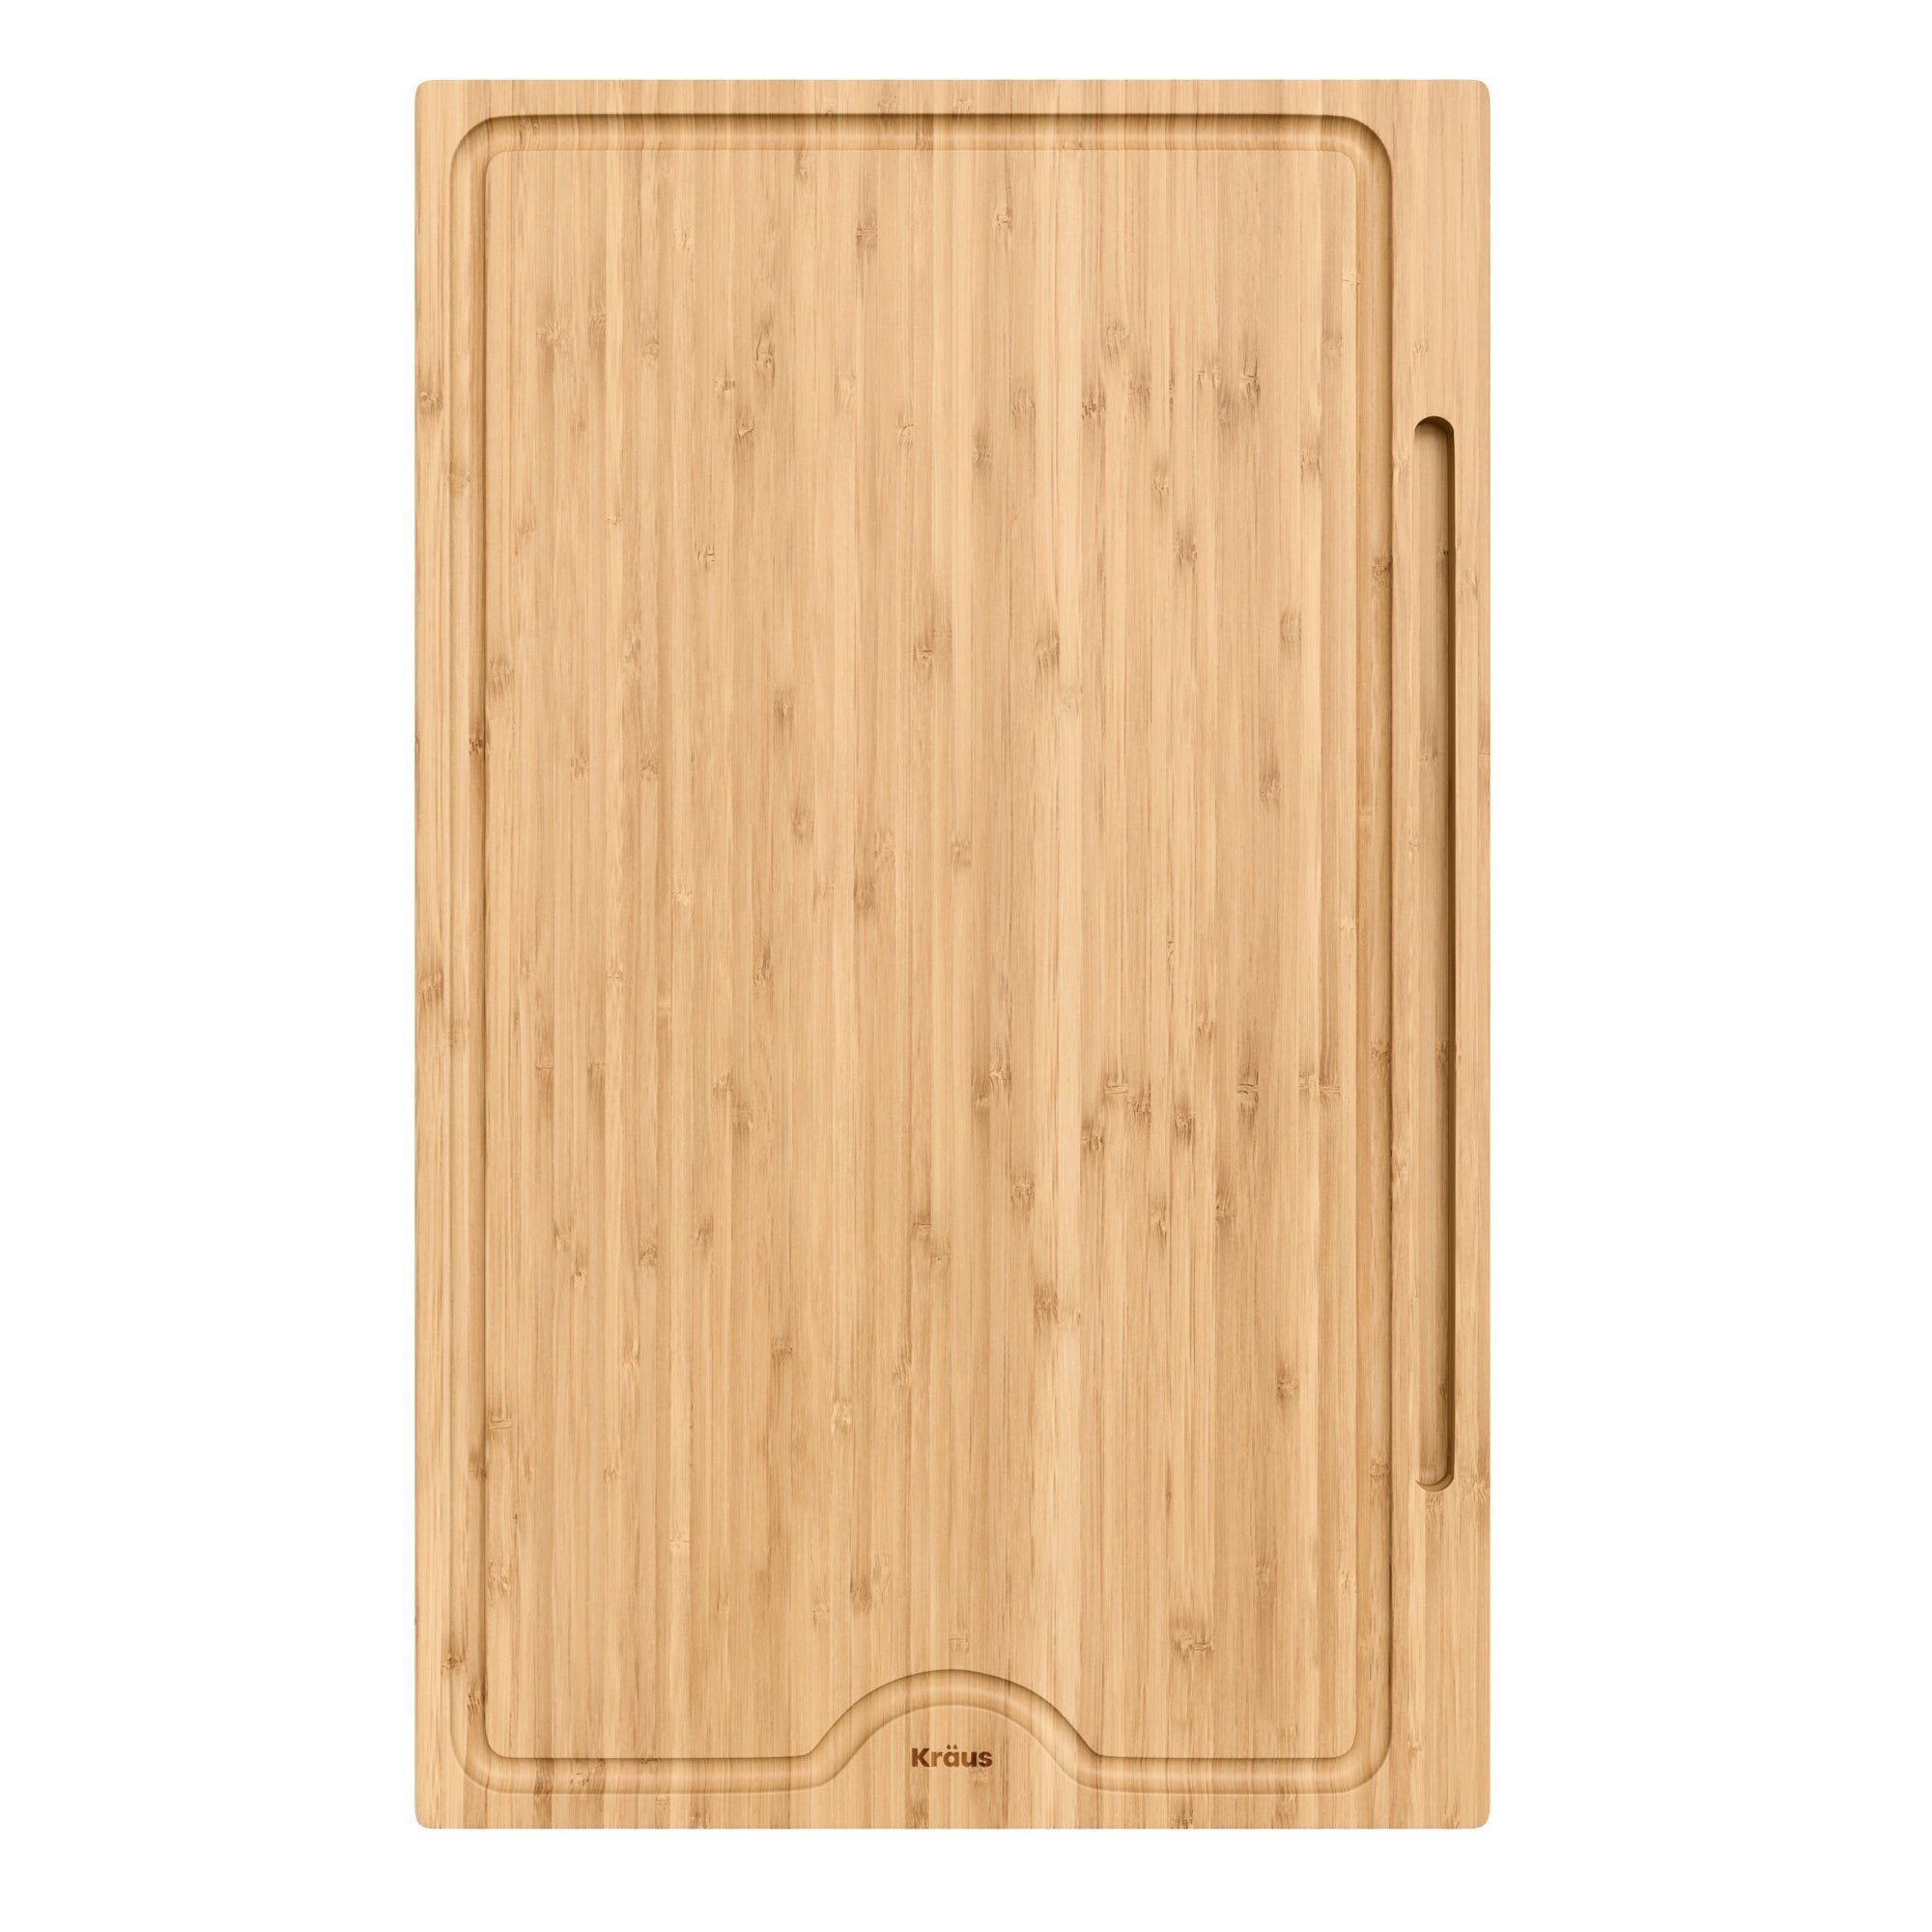 KCBT-103BB-Bamboo Cutting Board with Mobile Device Holder for most Standard Kitchen Sinks